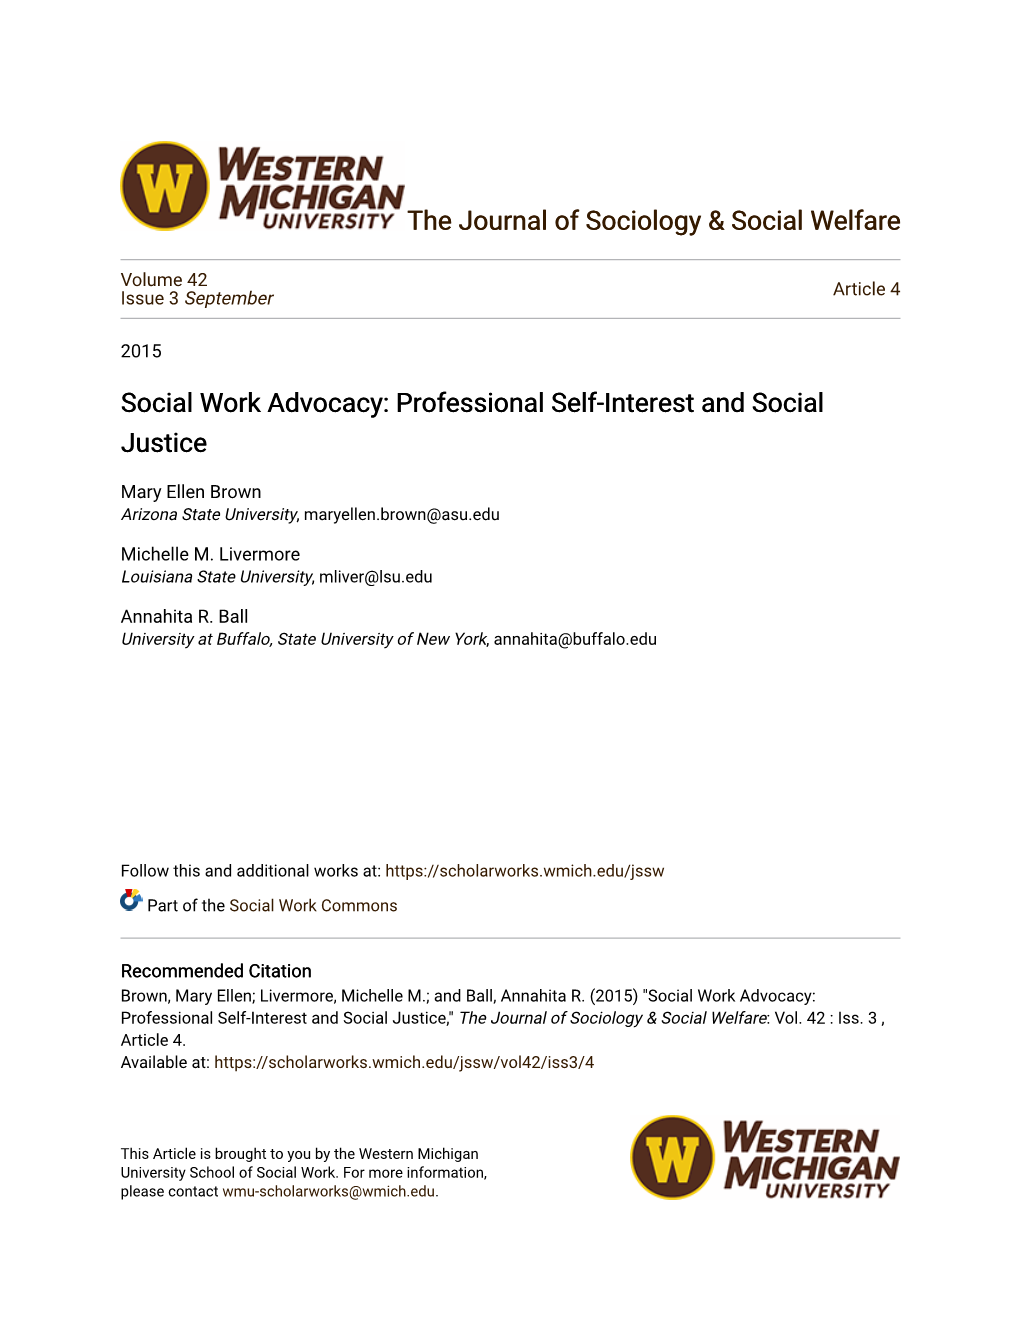 Social Work Advocacy: Professional Self-Interest and Social Justice